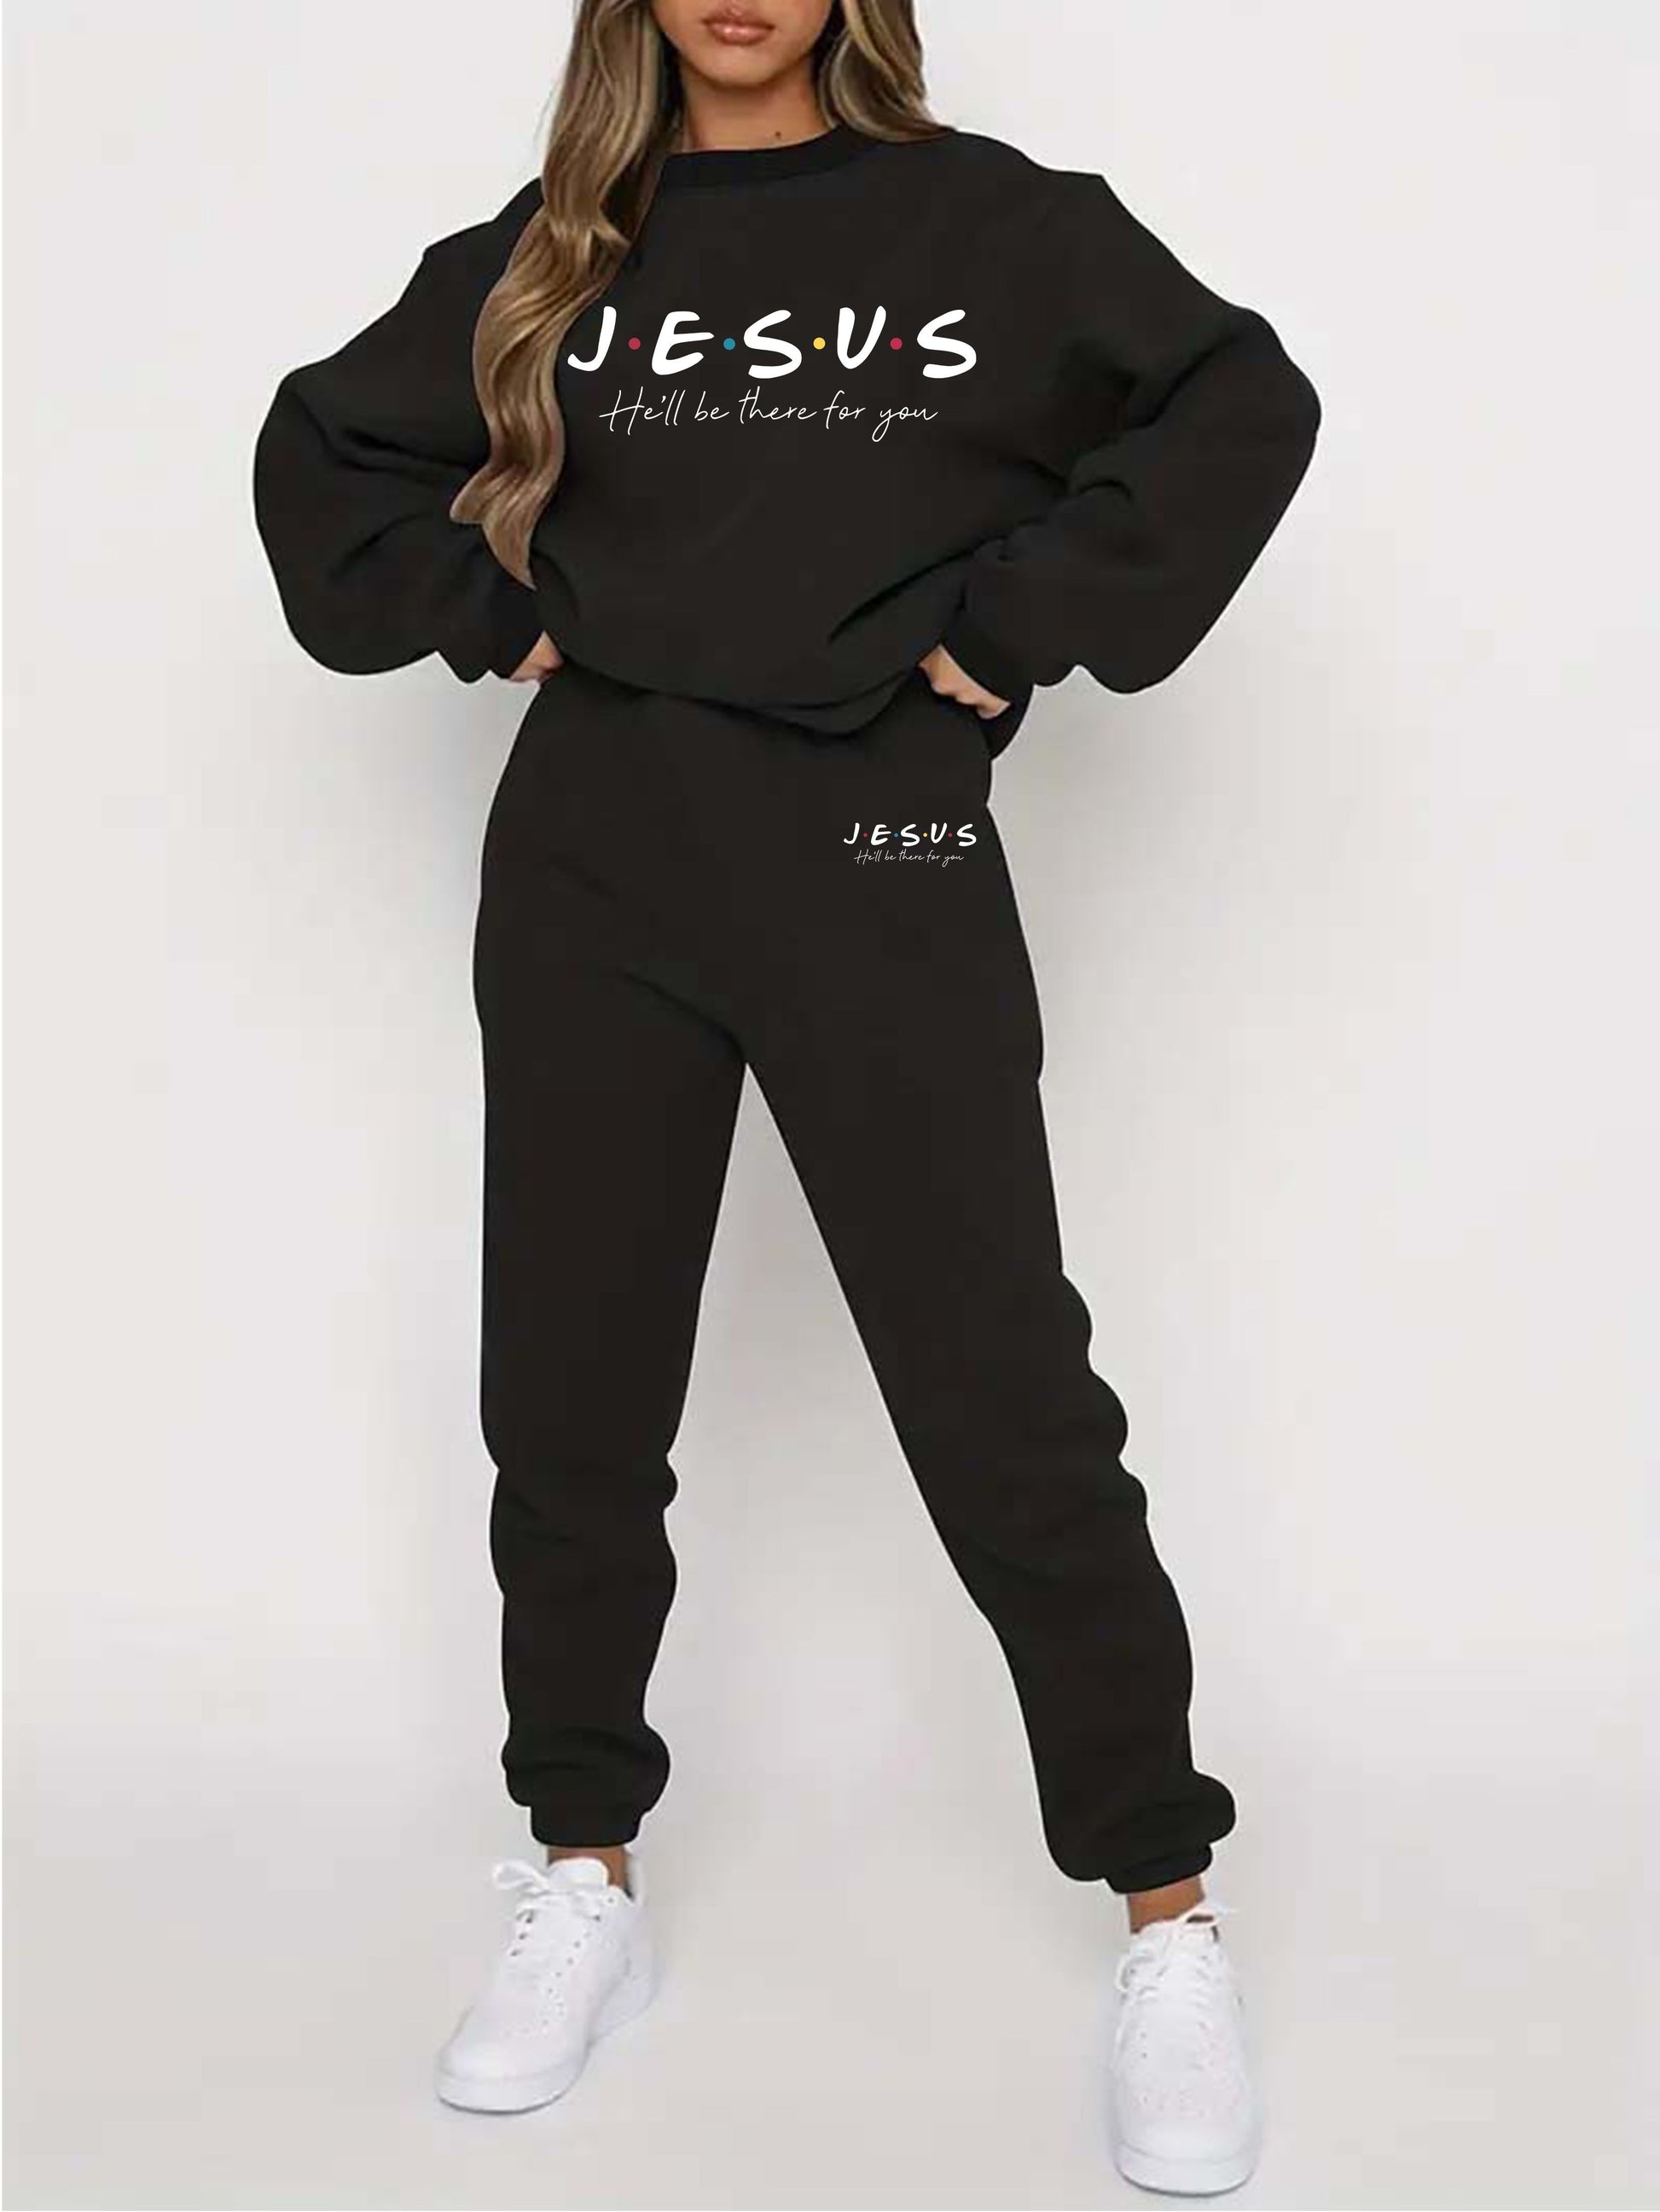 Jesus He'll Be There For You Women's Christian Casual Outfit claimedbygoddesigns